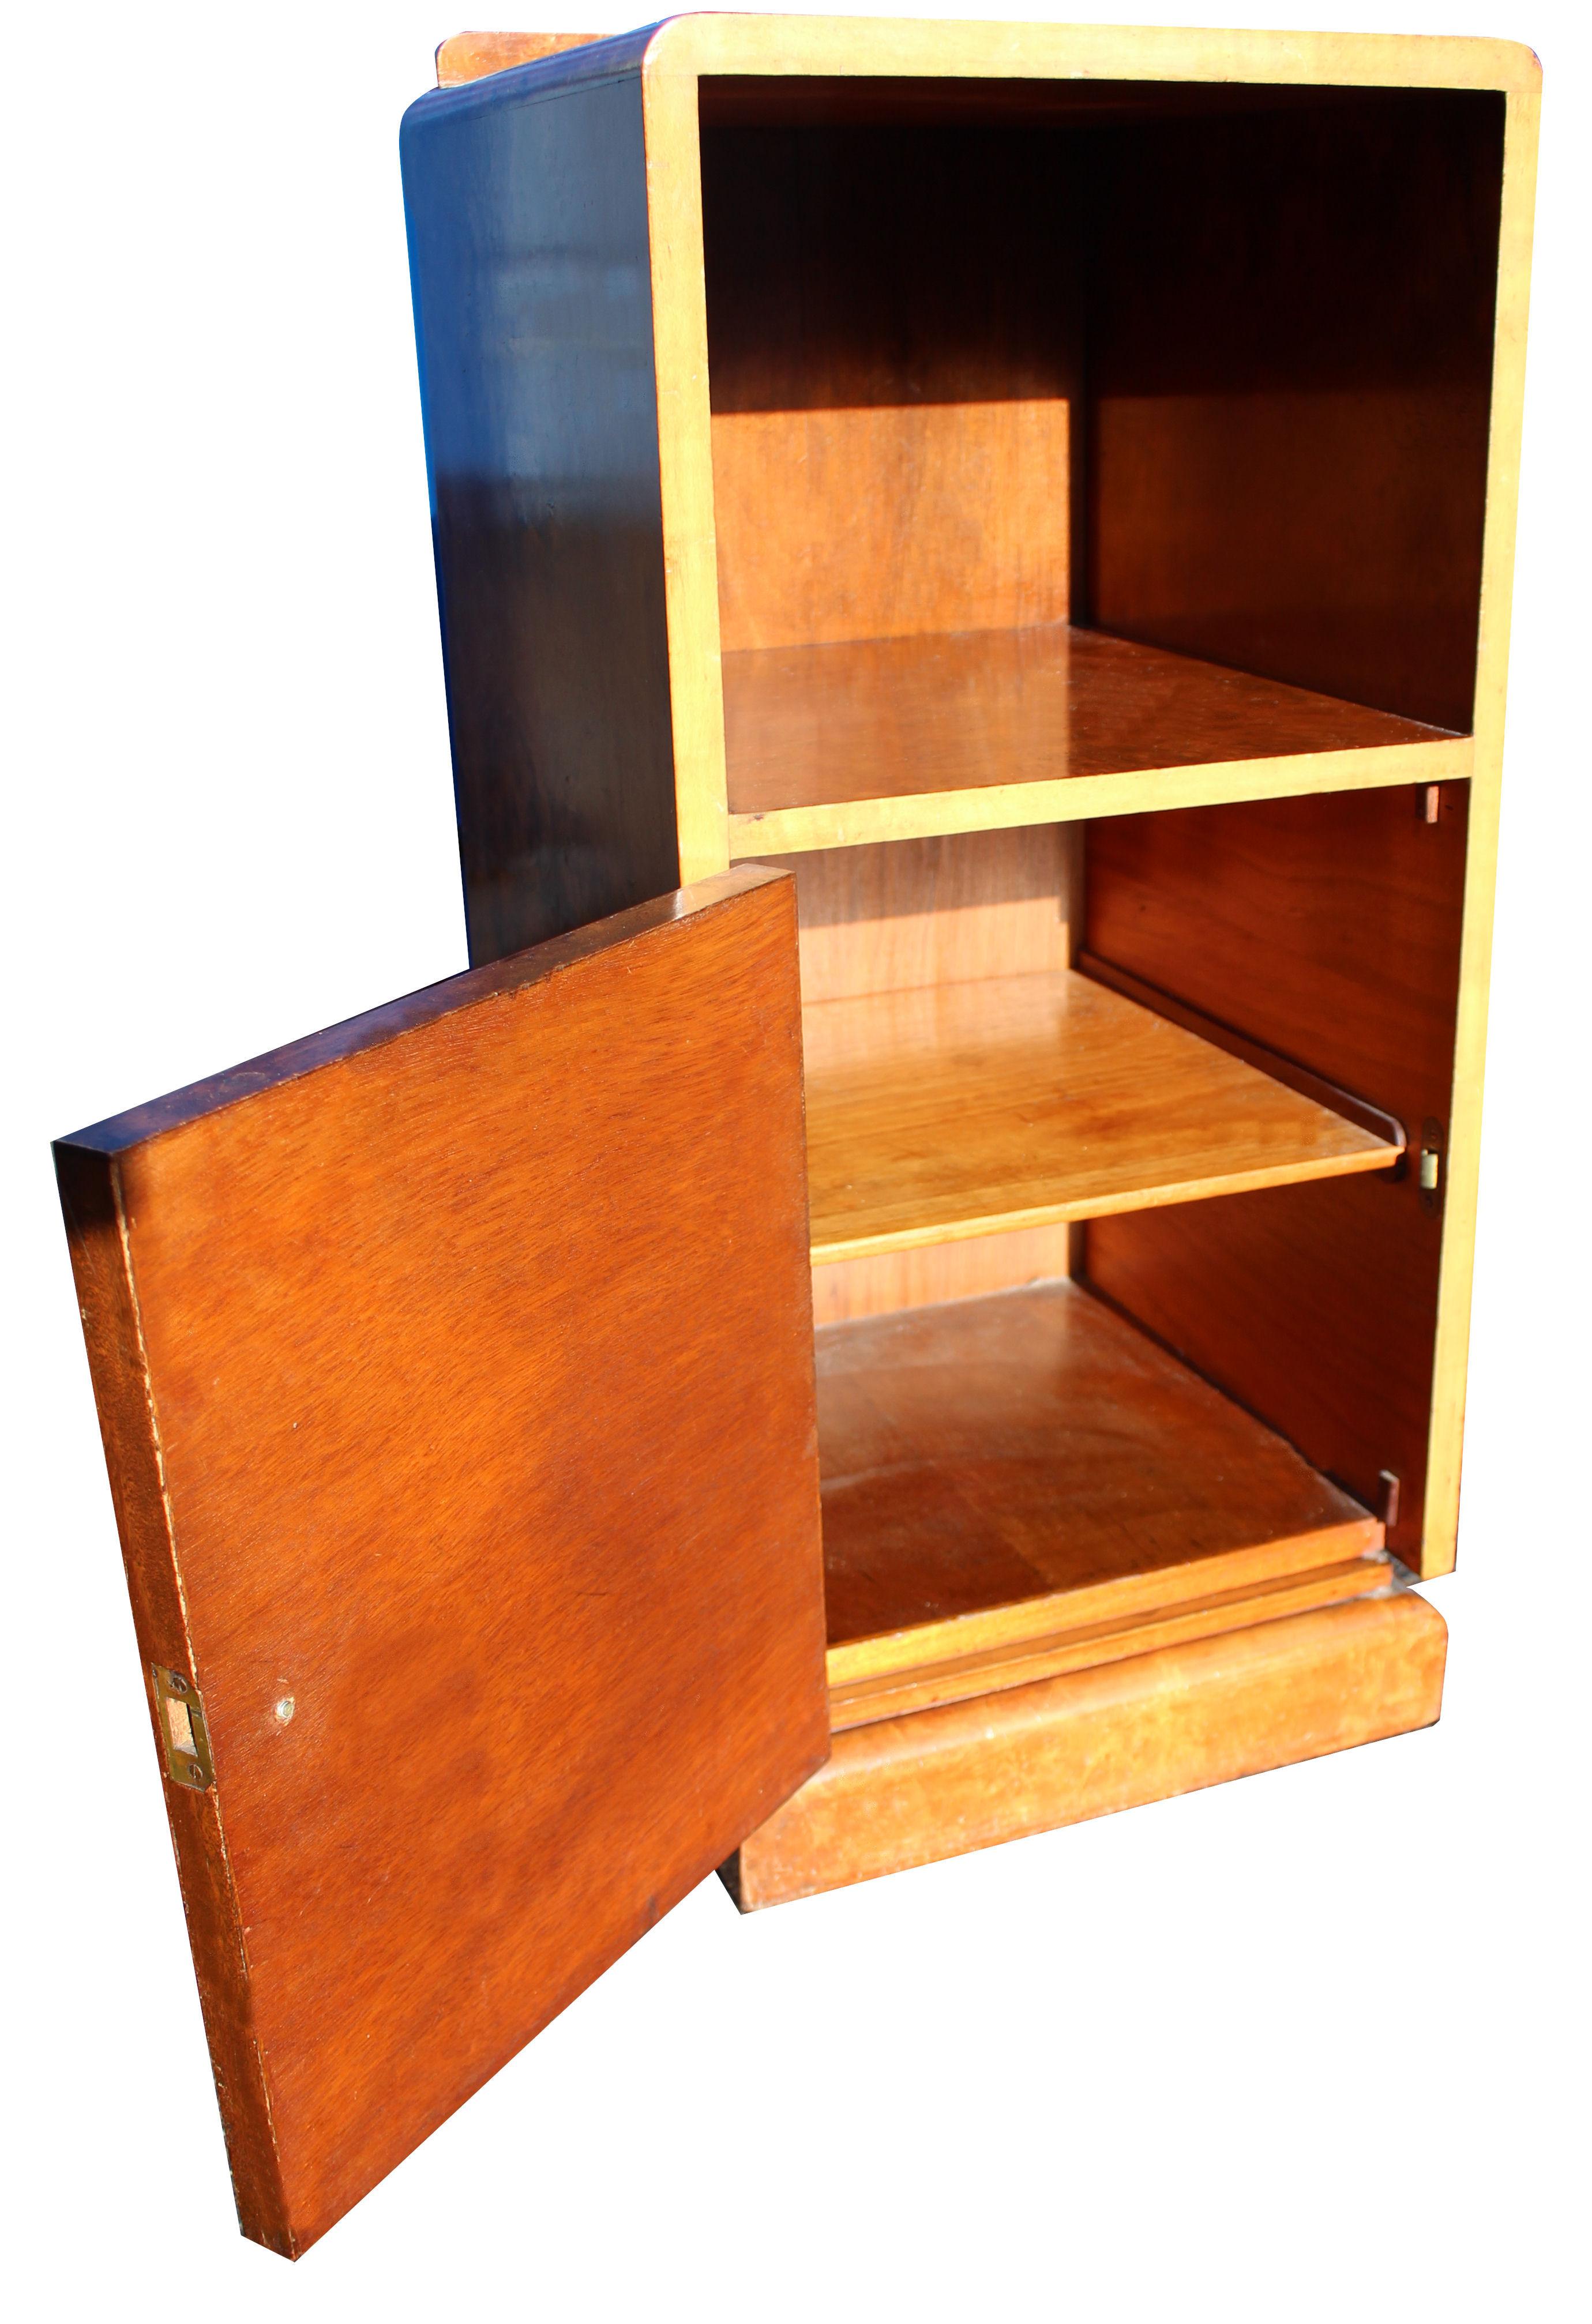 English Art Deco Pair of Matching Walnut Bedside Nightstand Cabinets, C 1930